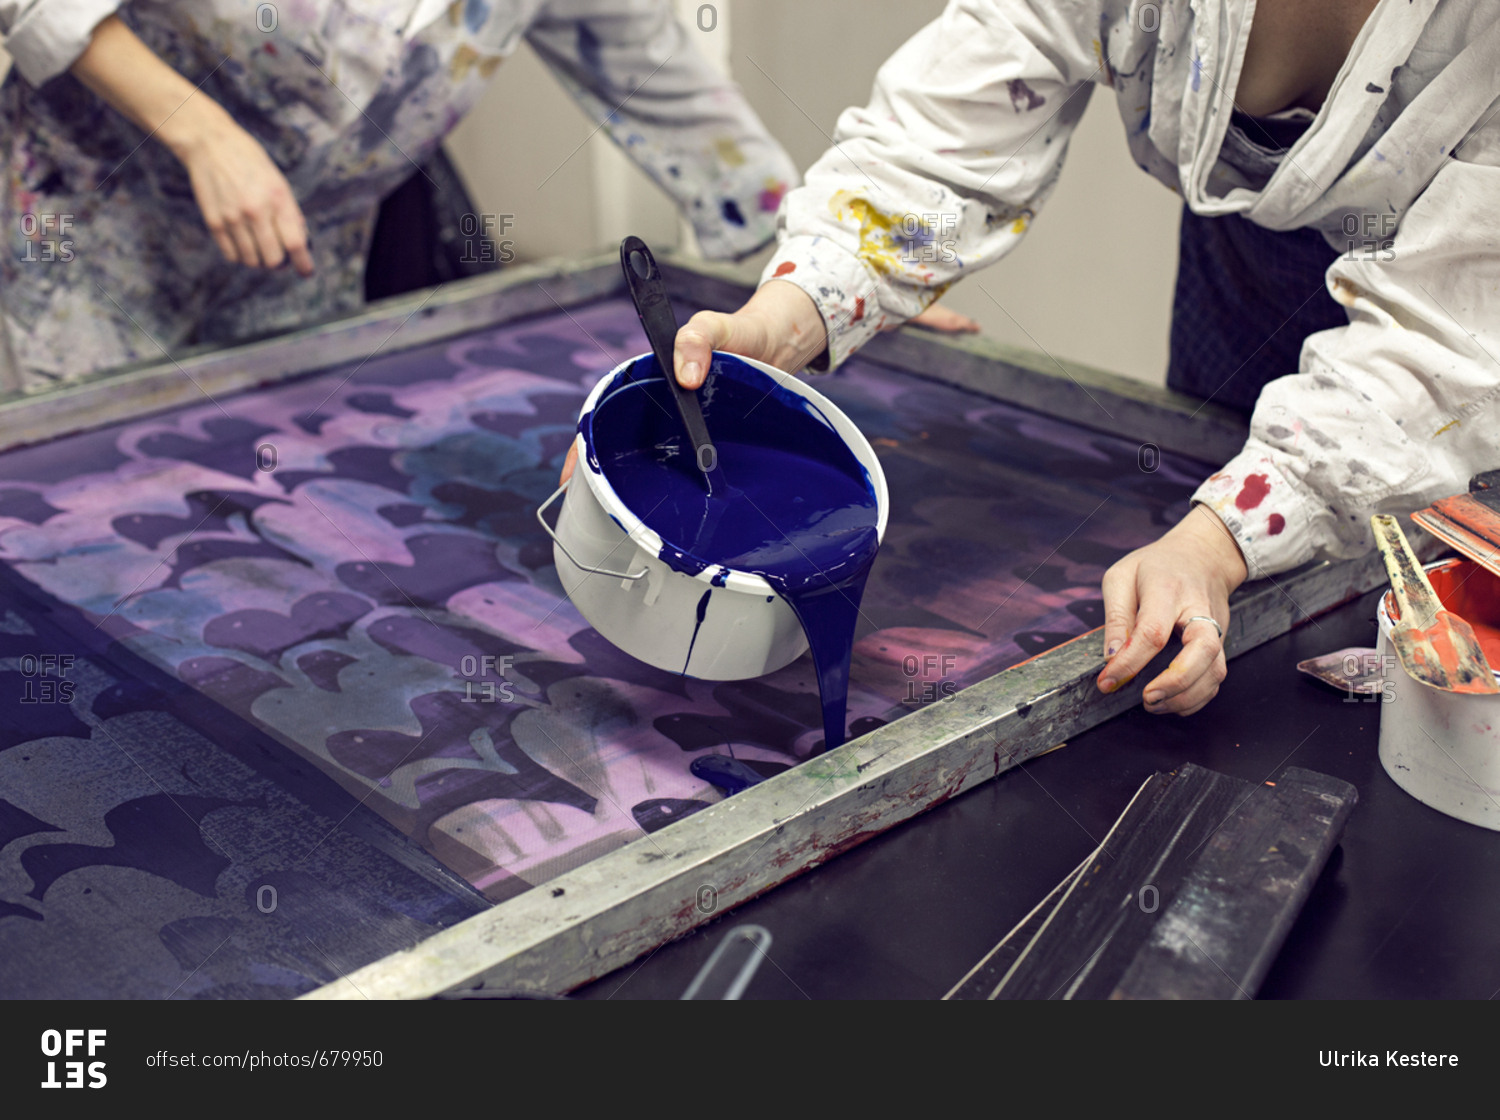 Textile designer pouring ink onto stencil as partner holds screen print stencil in studio